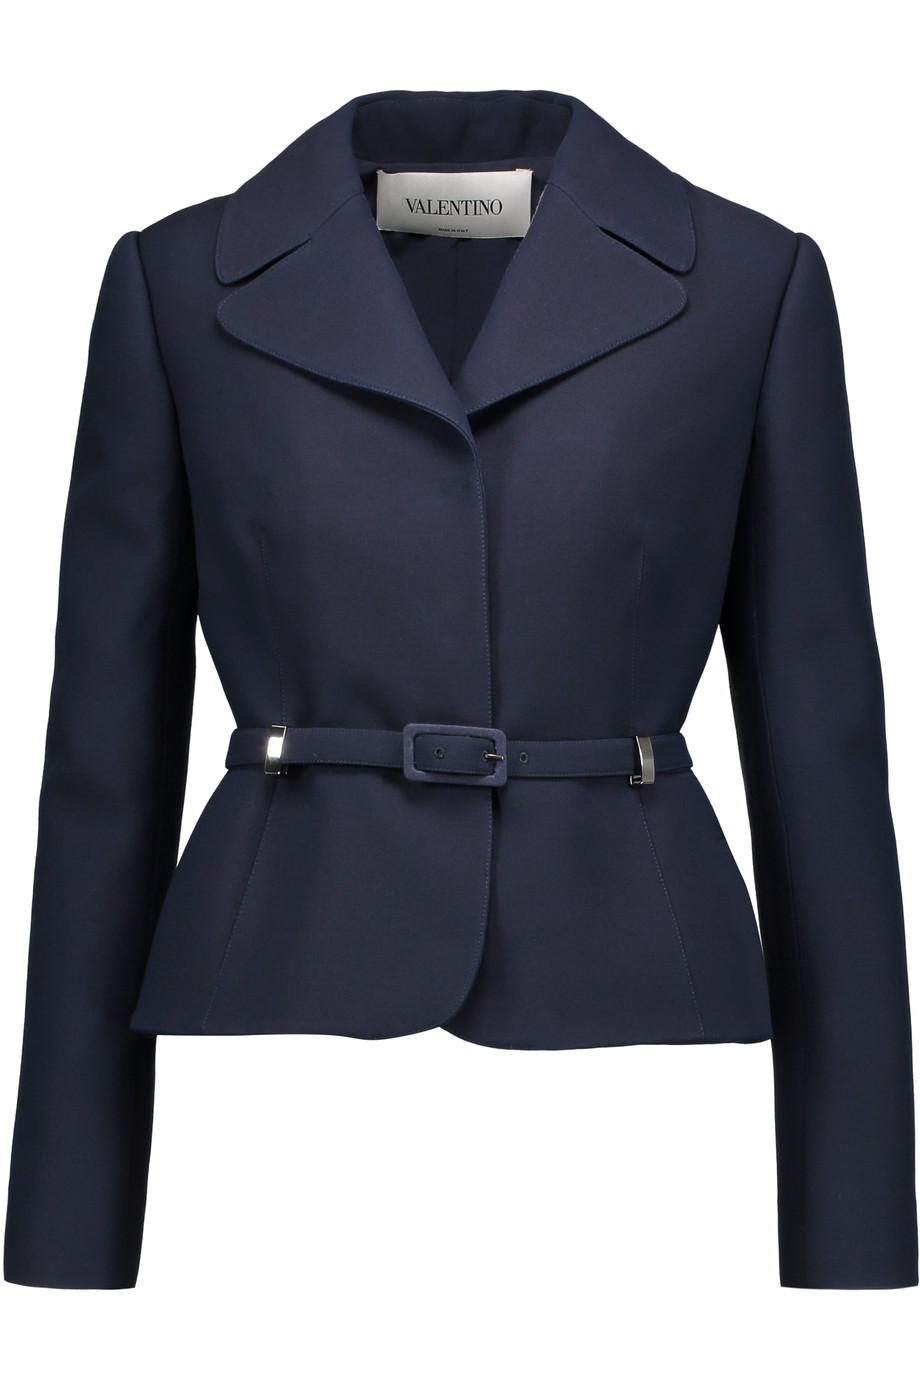 Valentino Belted Wool And Silk-blend Crepe Jacket | ModeSens